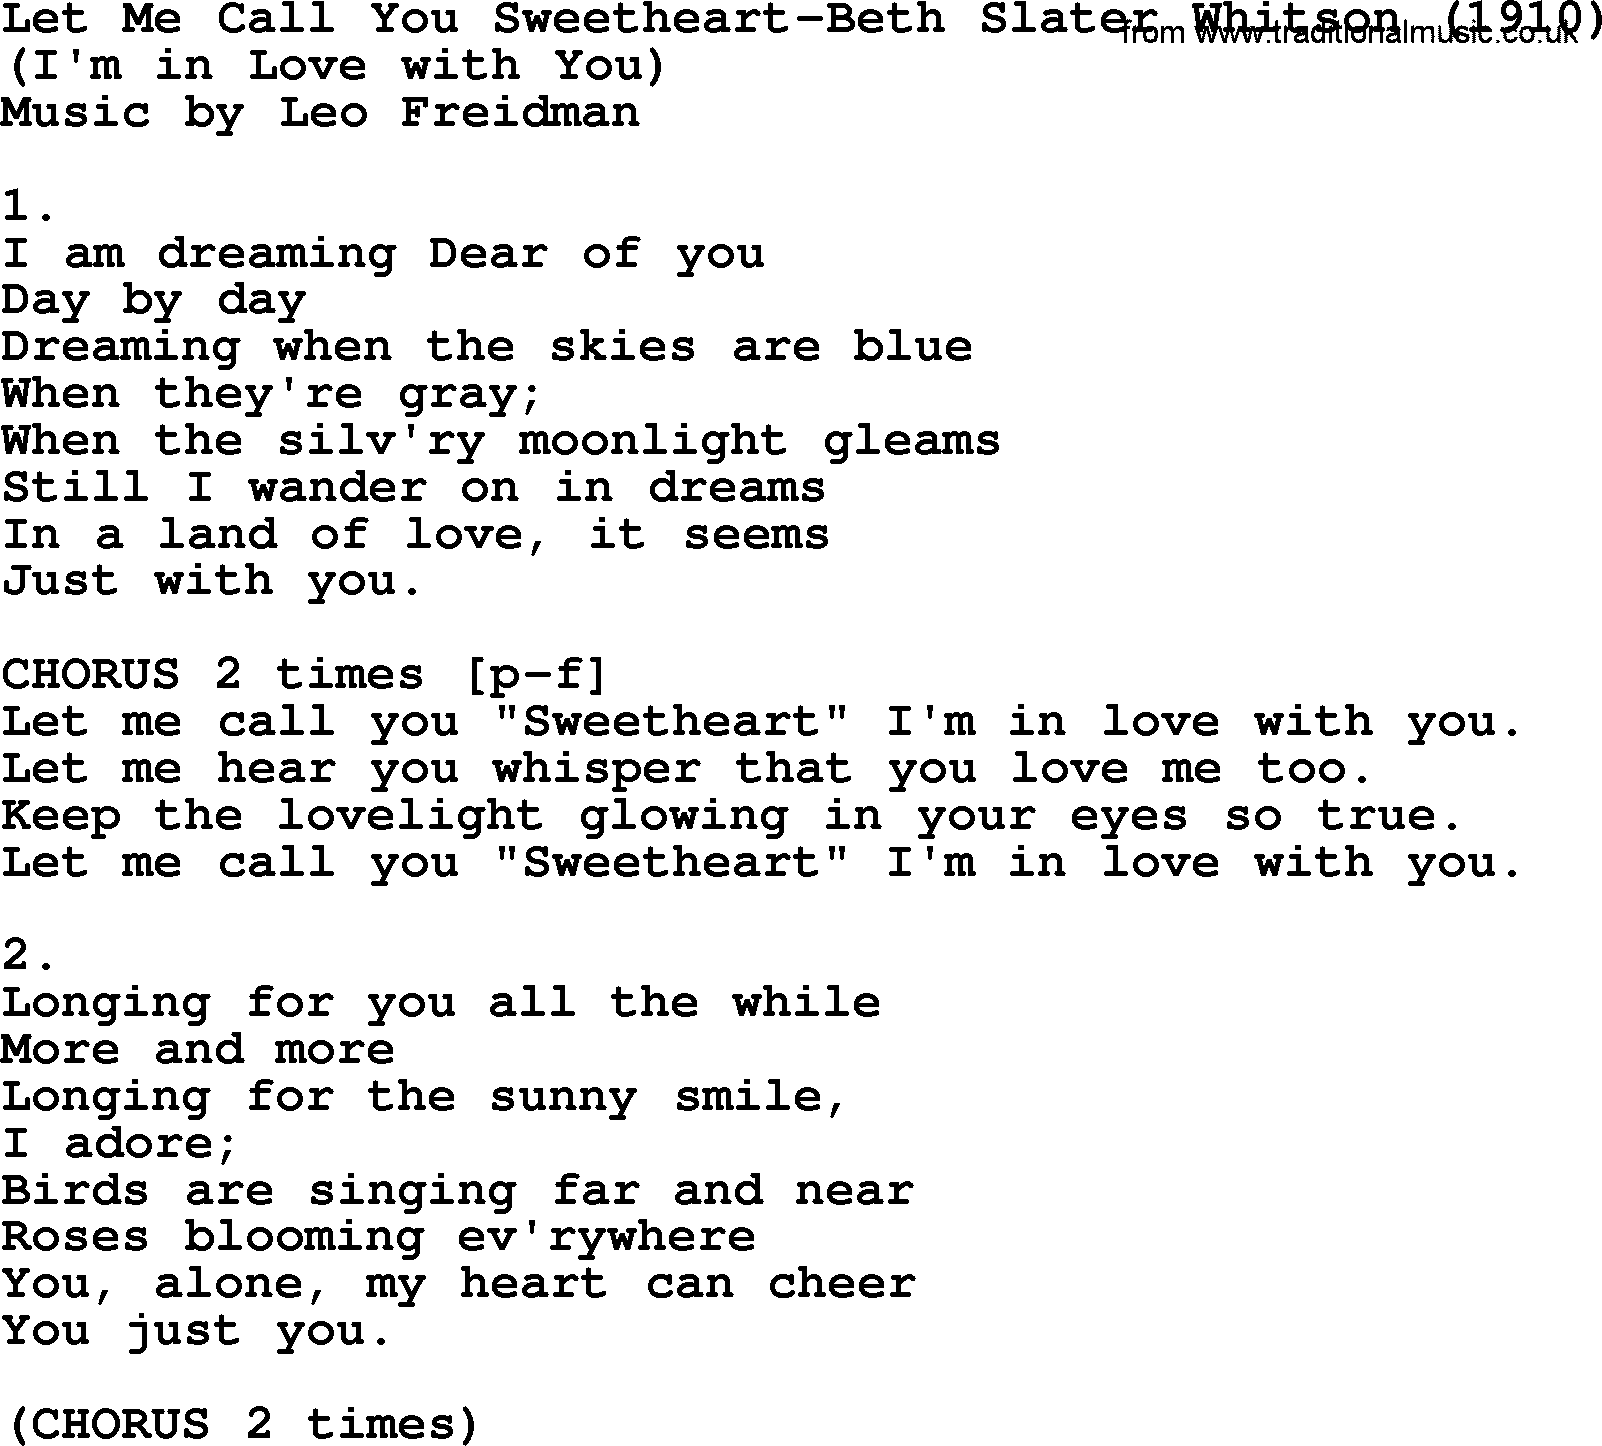 World War(WW1) One Song: Let Me Call You Sweetheart-Beth Slater Whitson 1910, lyrics and PDF